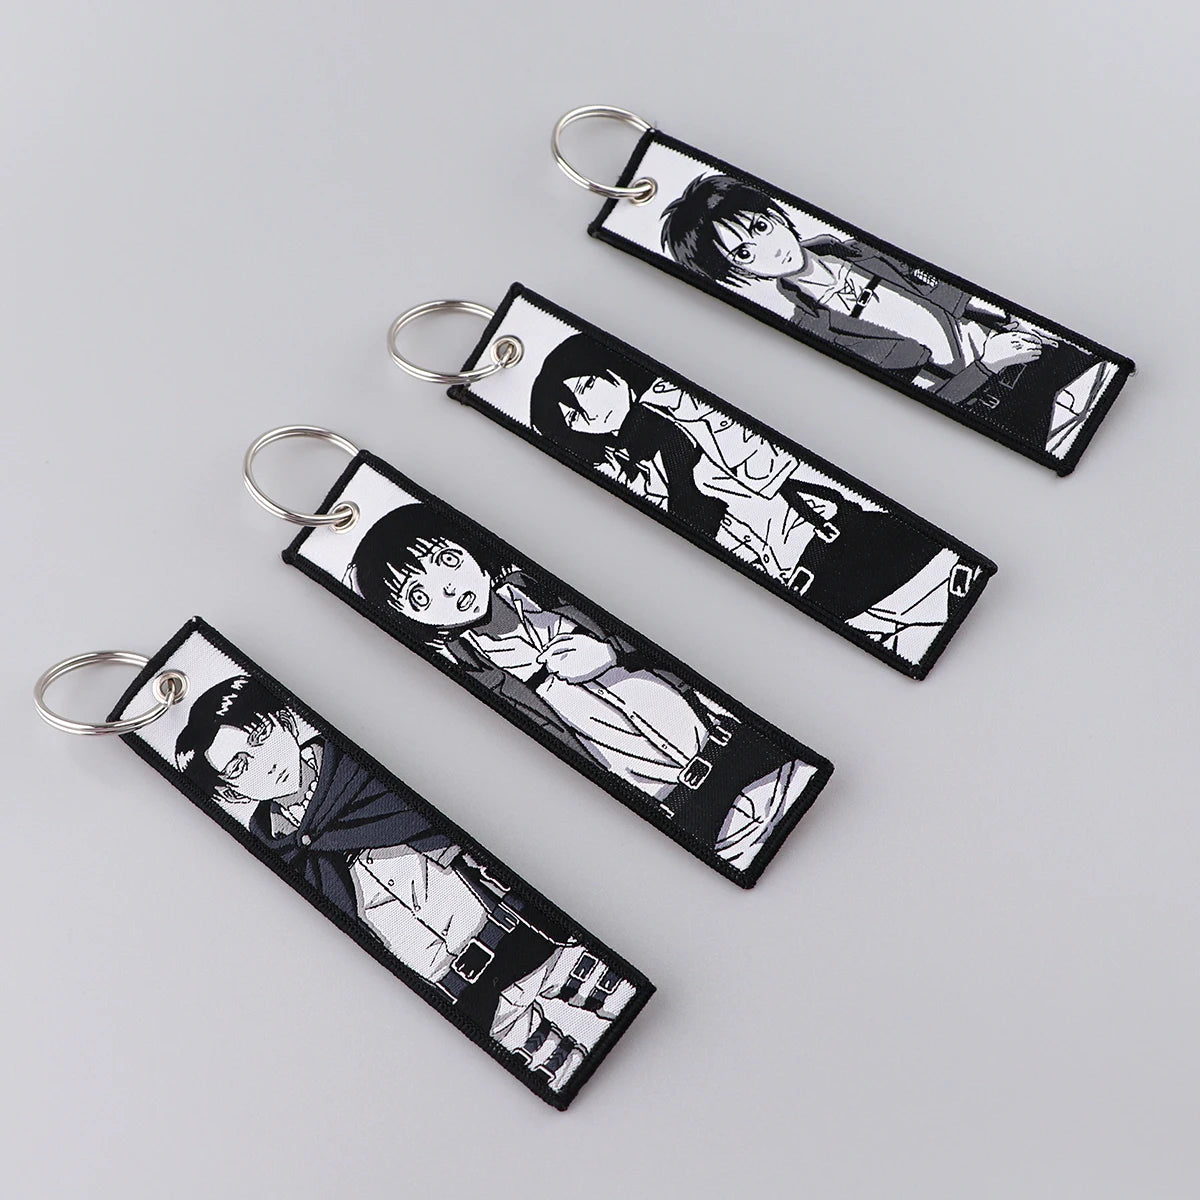 Japanese Anime Keychain Embroidery Collection 2